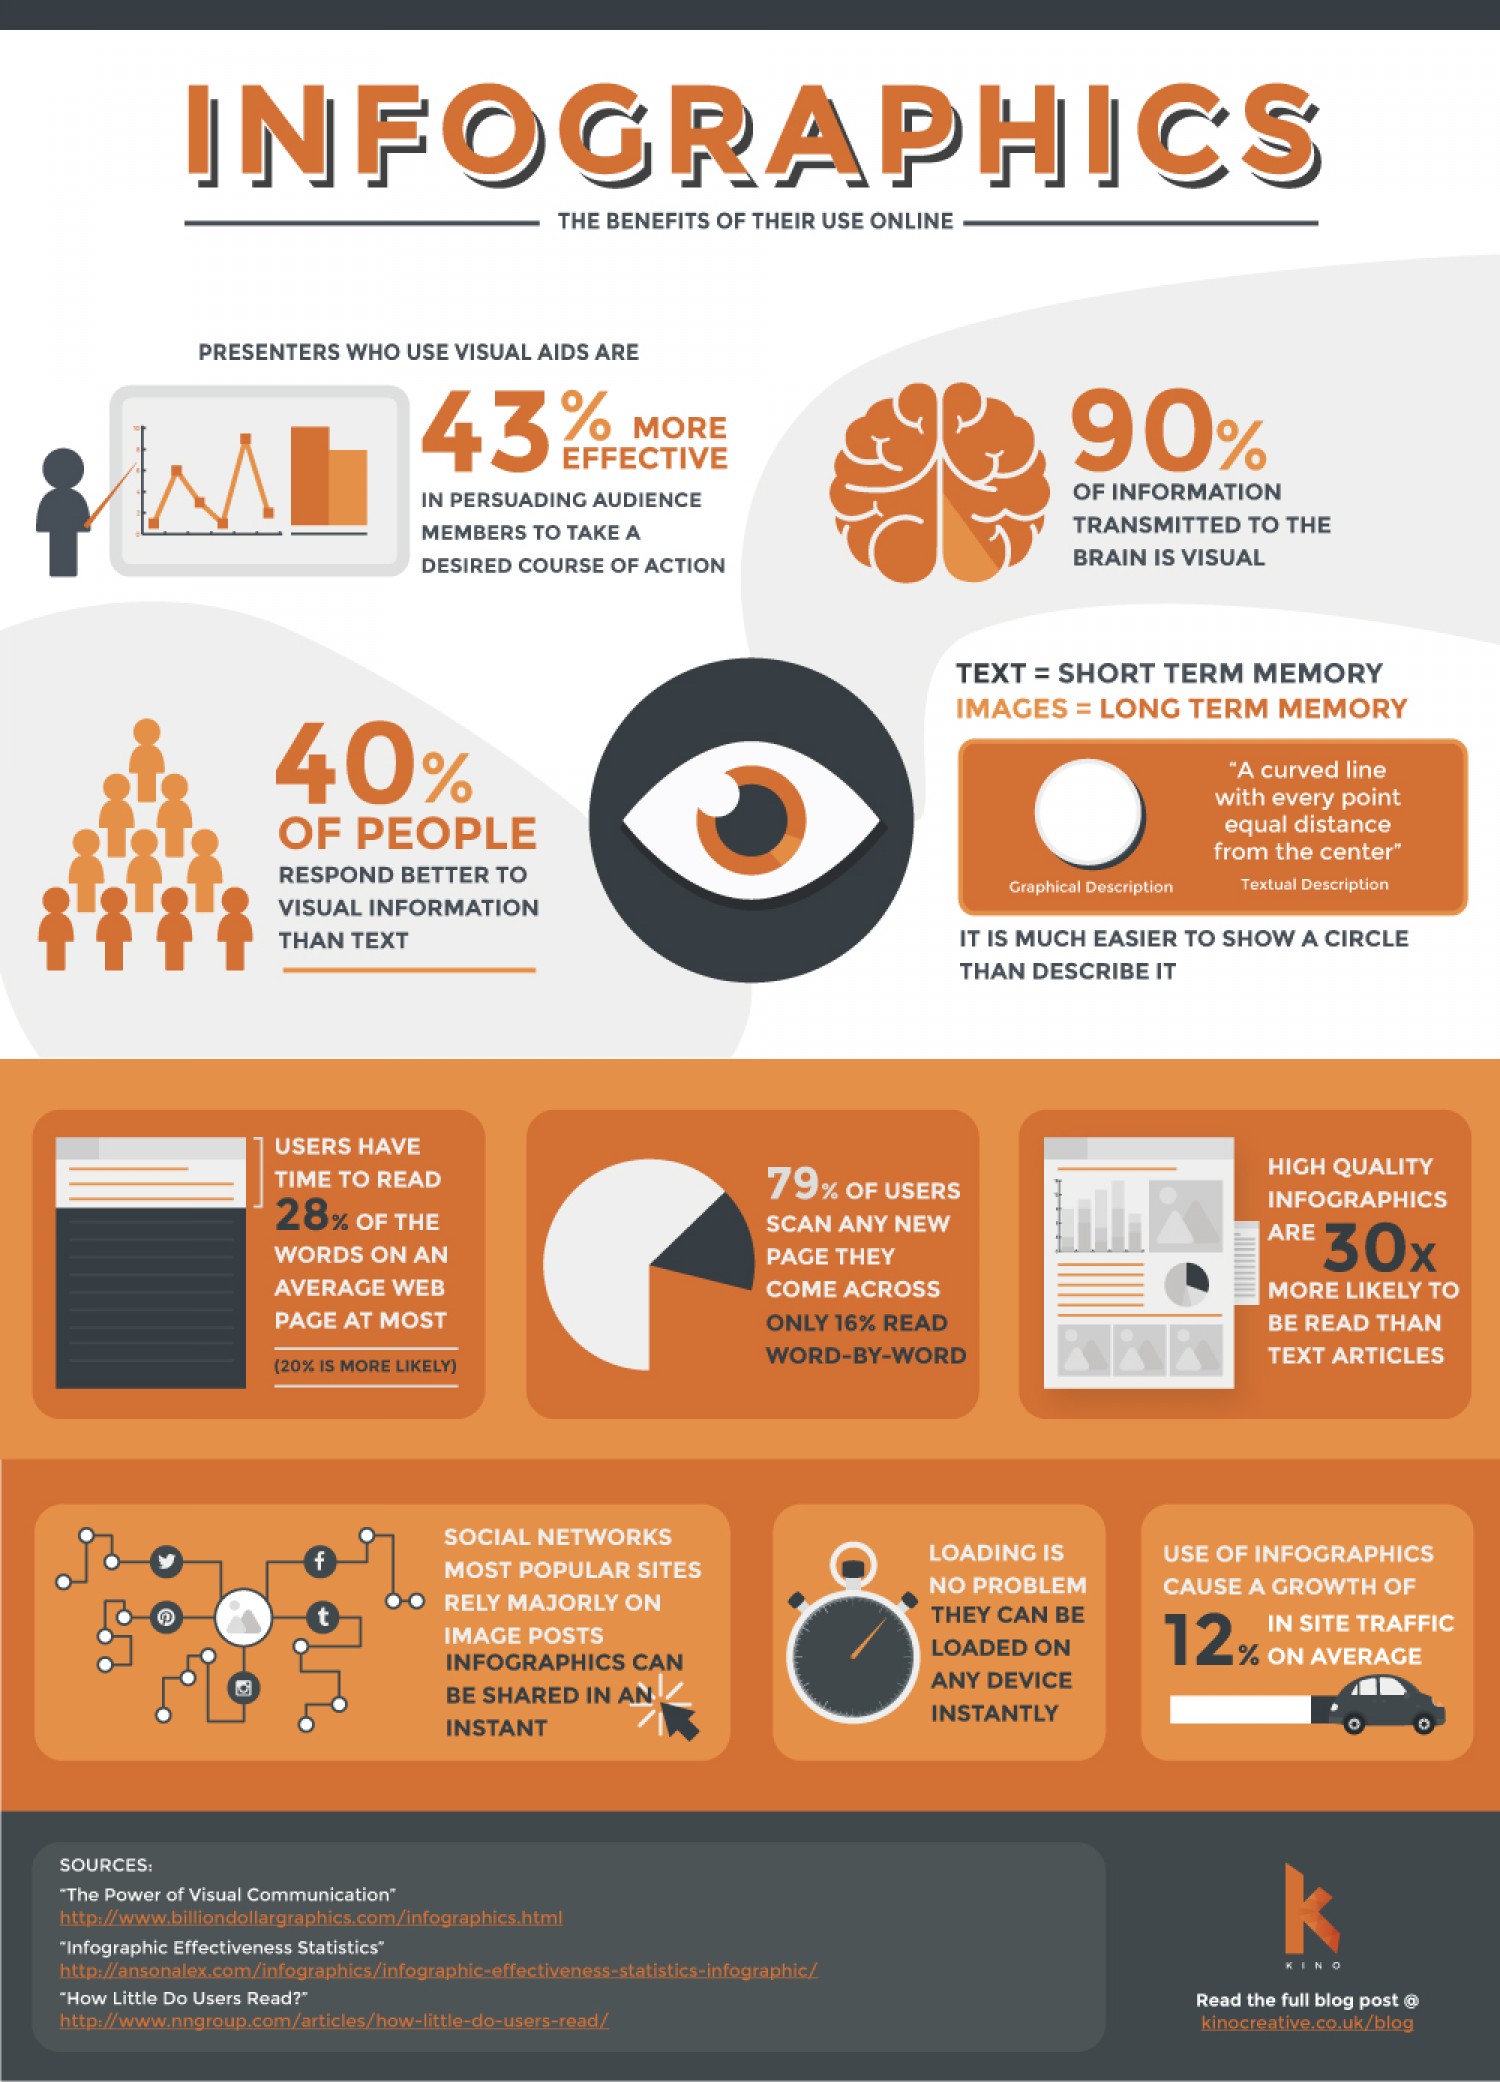 Why you should use infograhics to make your content more interesting.